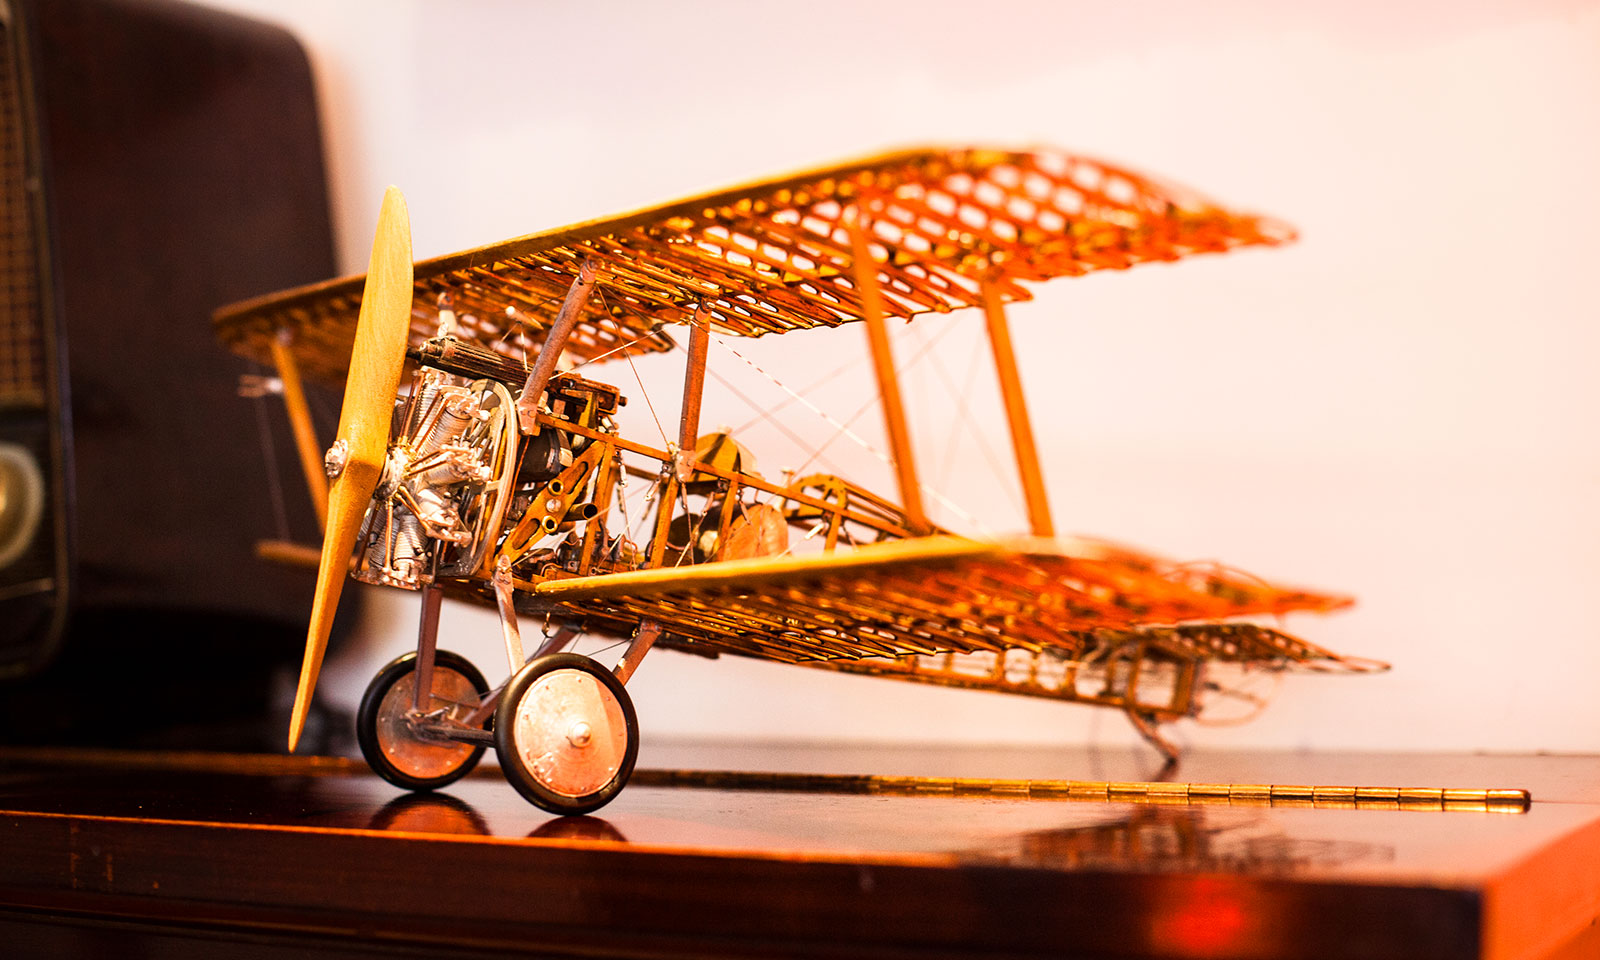 A model airplane on our piano. We love the little touches.